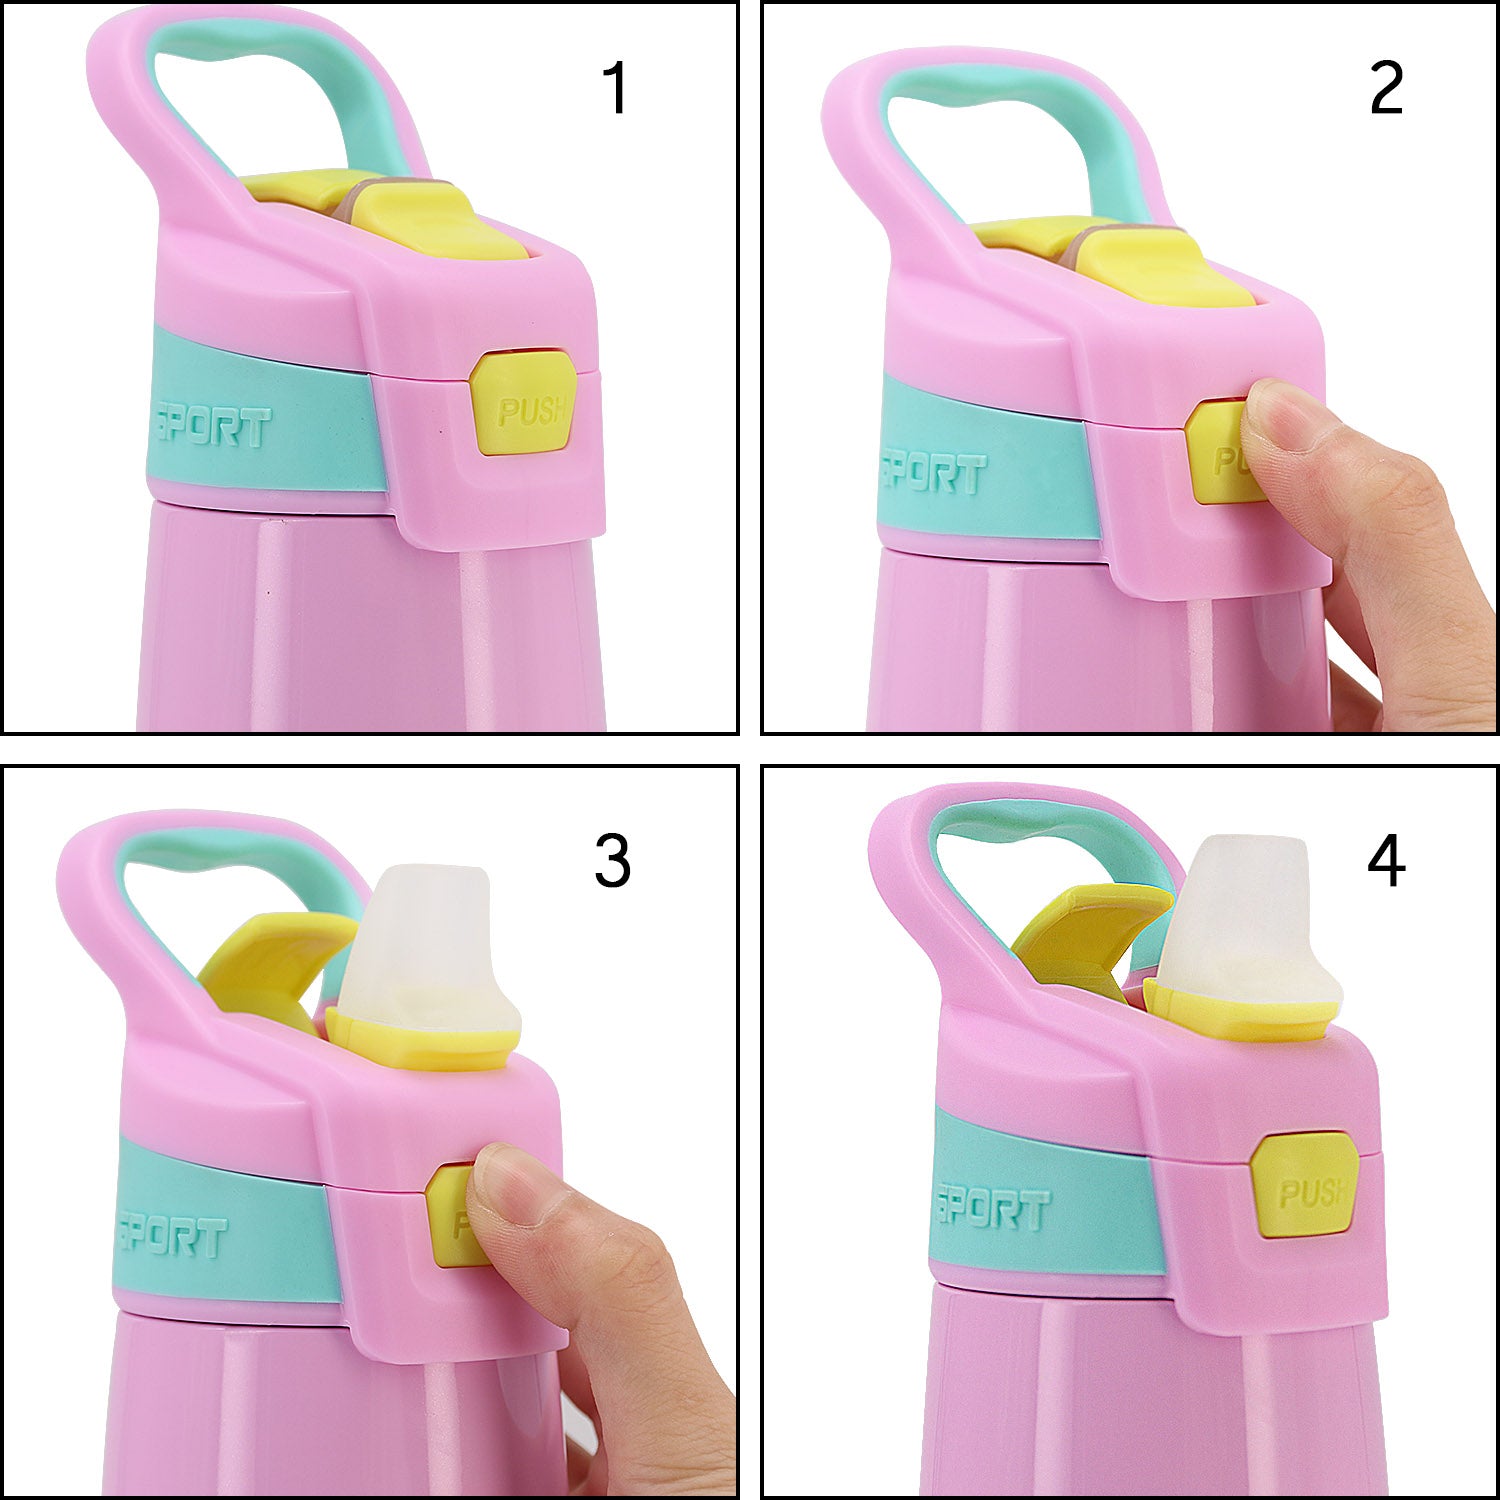 JUSTUP Kids Insulated Water Bottle with Straw Flip-Top Stainless